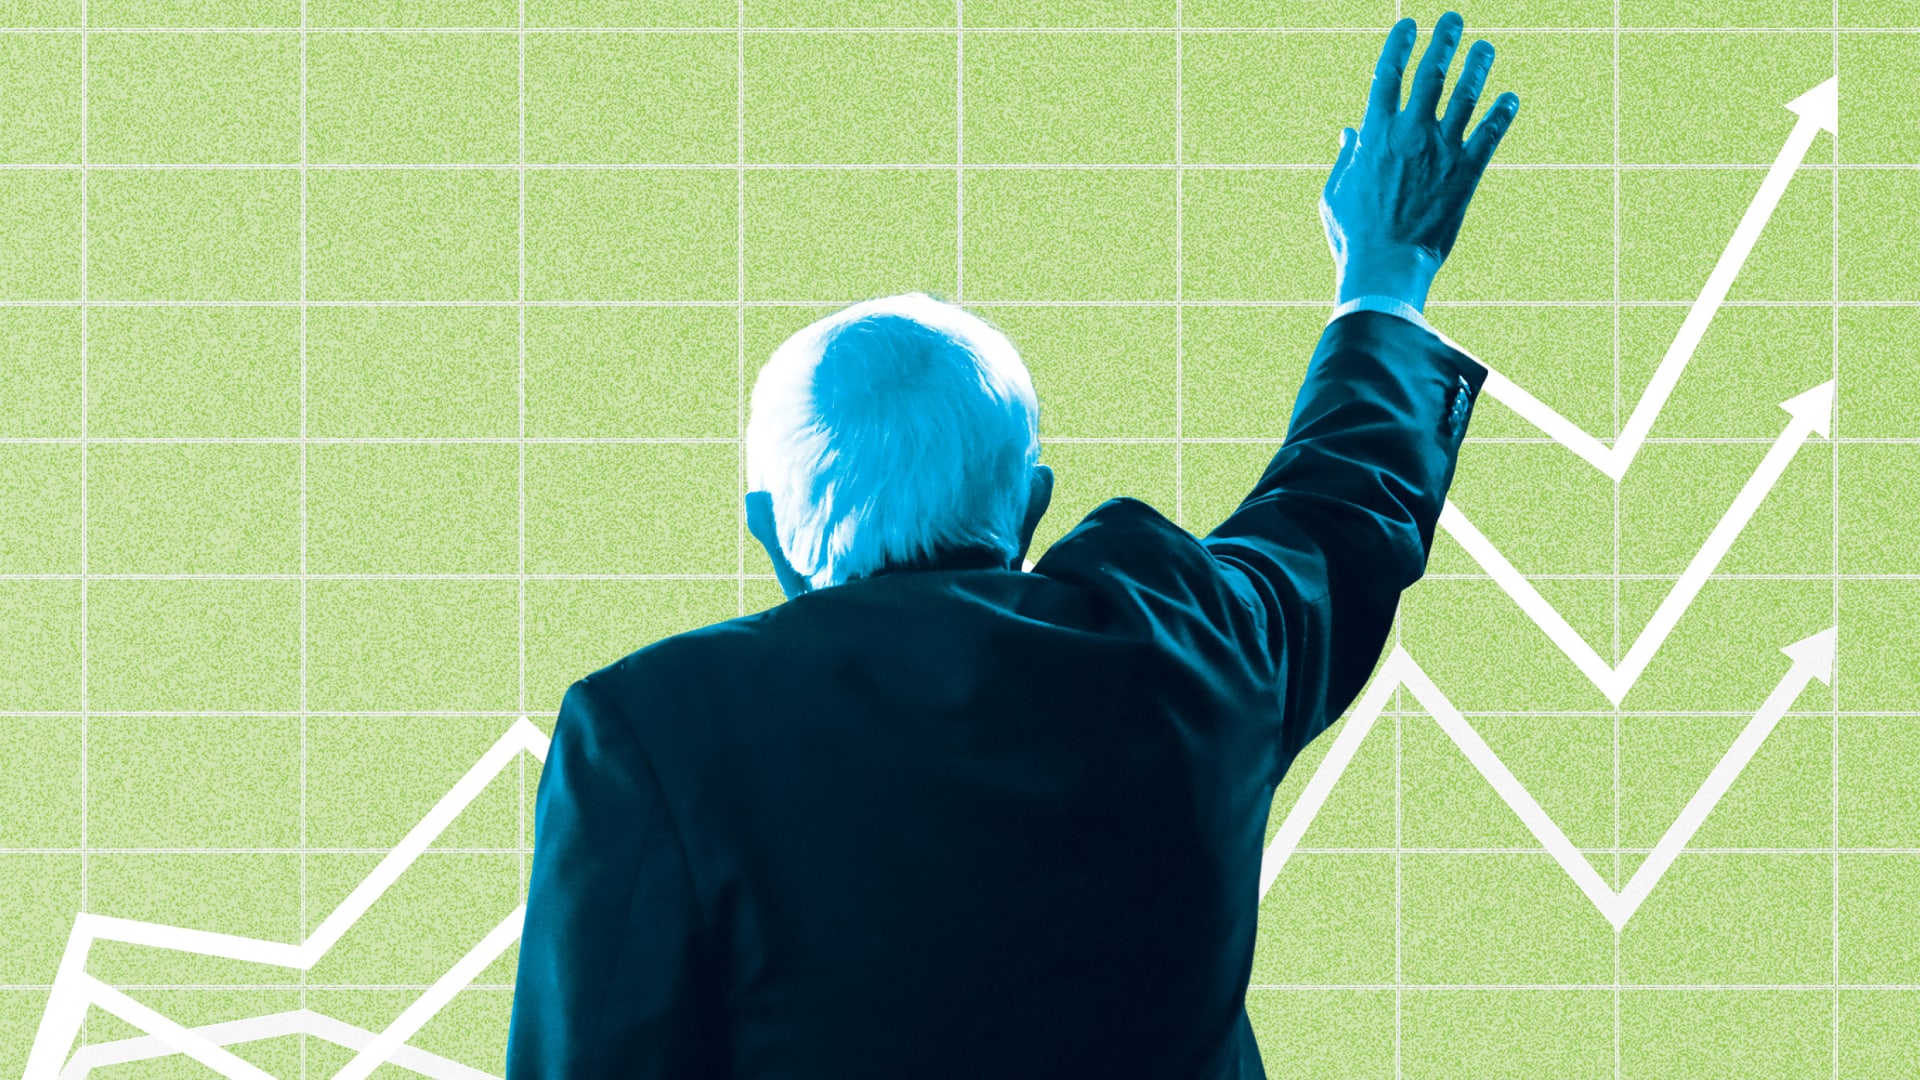 Bernie Sanders dropping out of the presidential race has been great for health insurance stocks